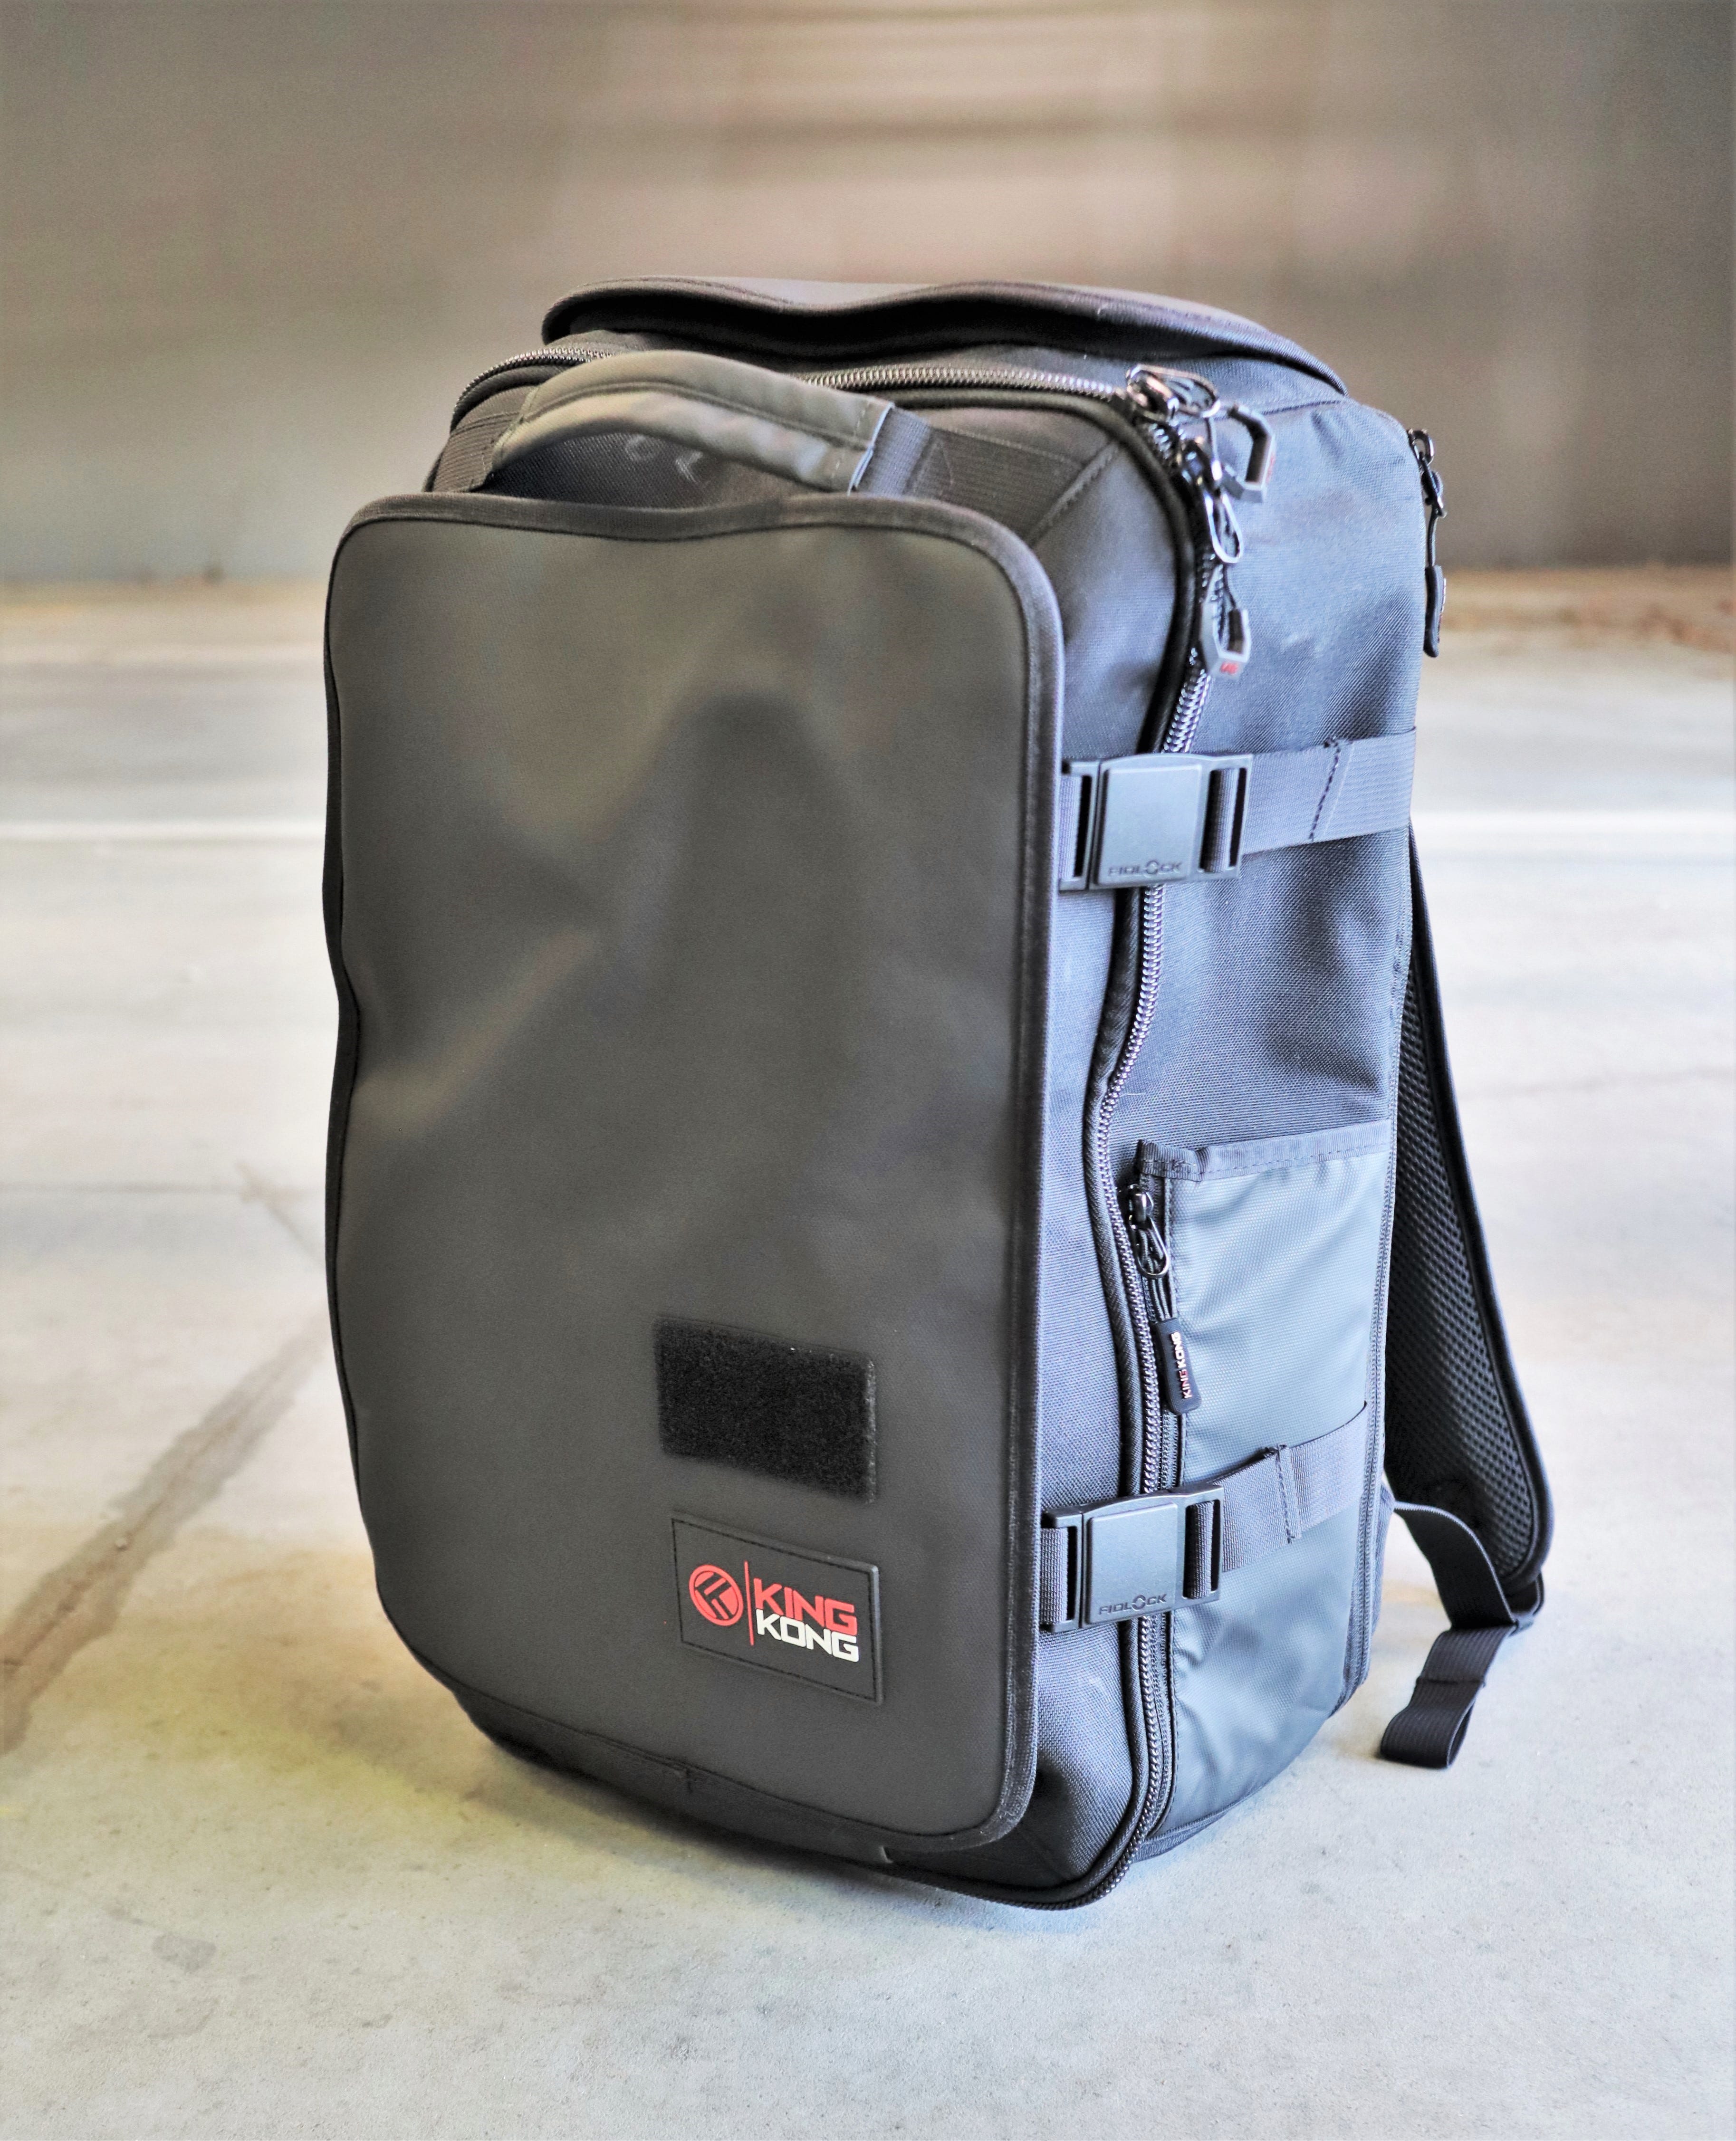 King Kong Edge35 Backpack Review. Over the past few years we've tested a… |  by Geoff C | Pangolins with Packs